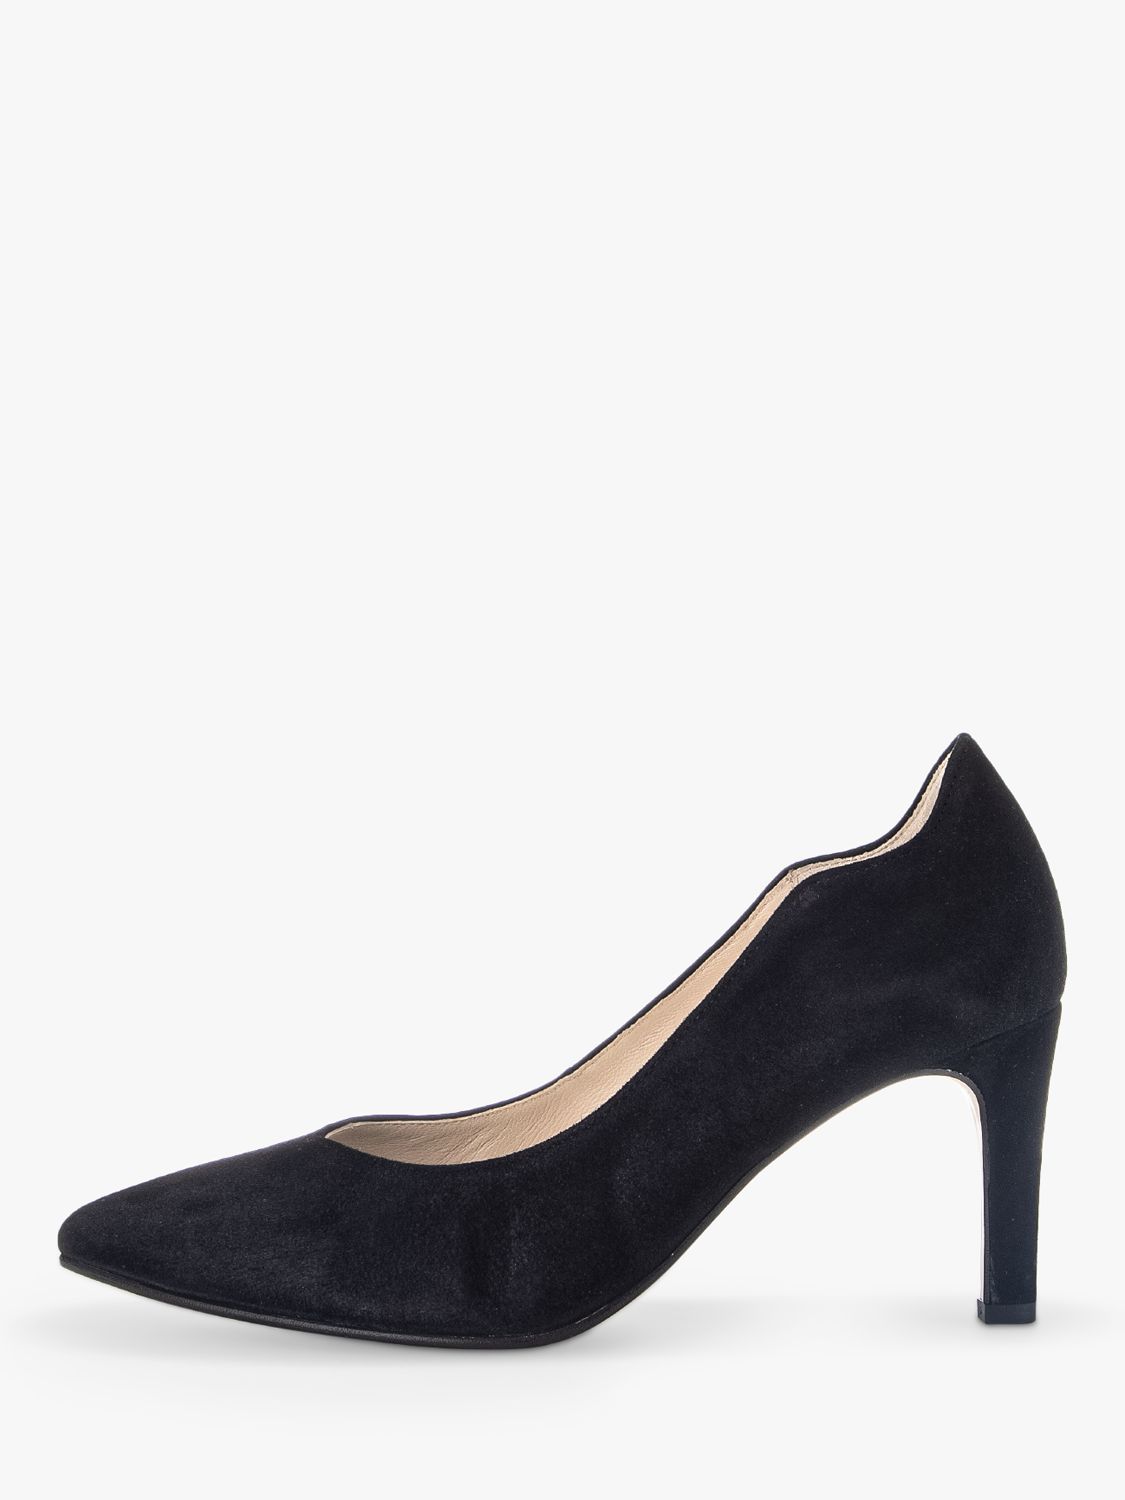 Gabor Degree Suede Court Shoes, Black at John Lewis & Partners